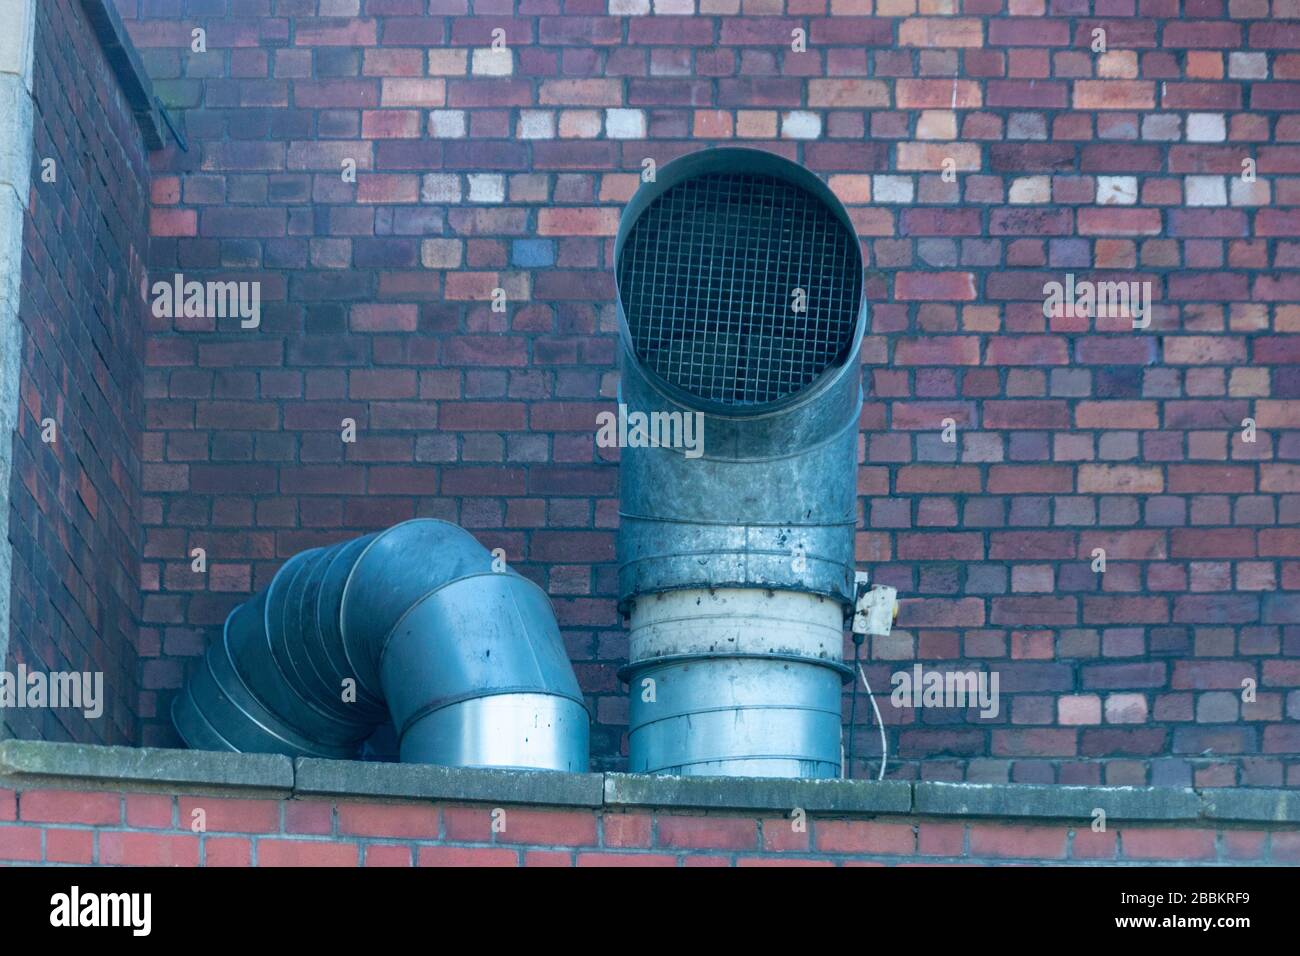 a close up view steam coming out the top of two large metal air ventaltion ducts Stock Photo